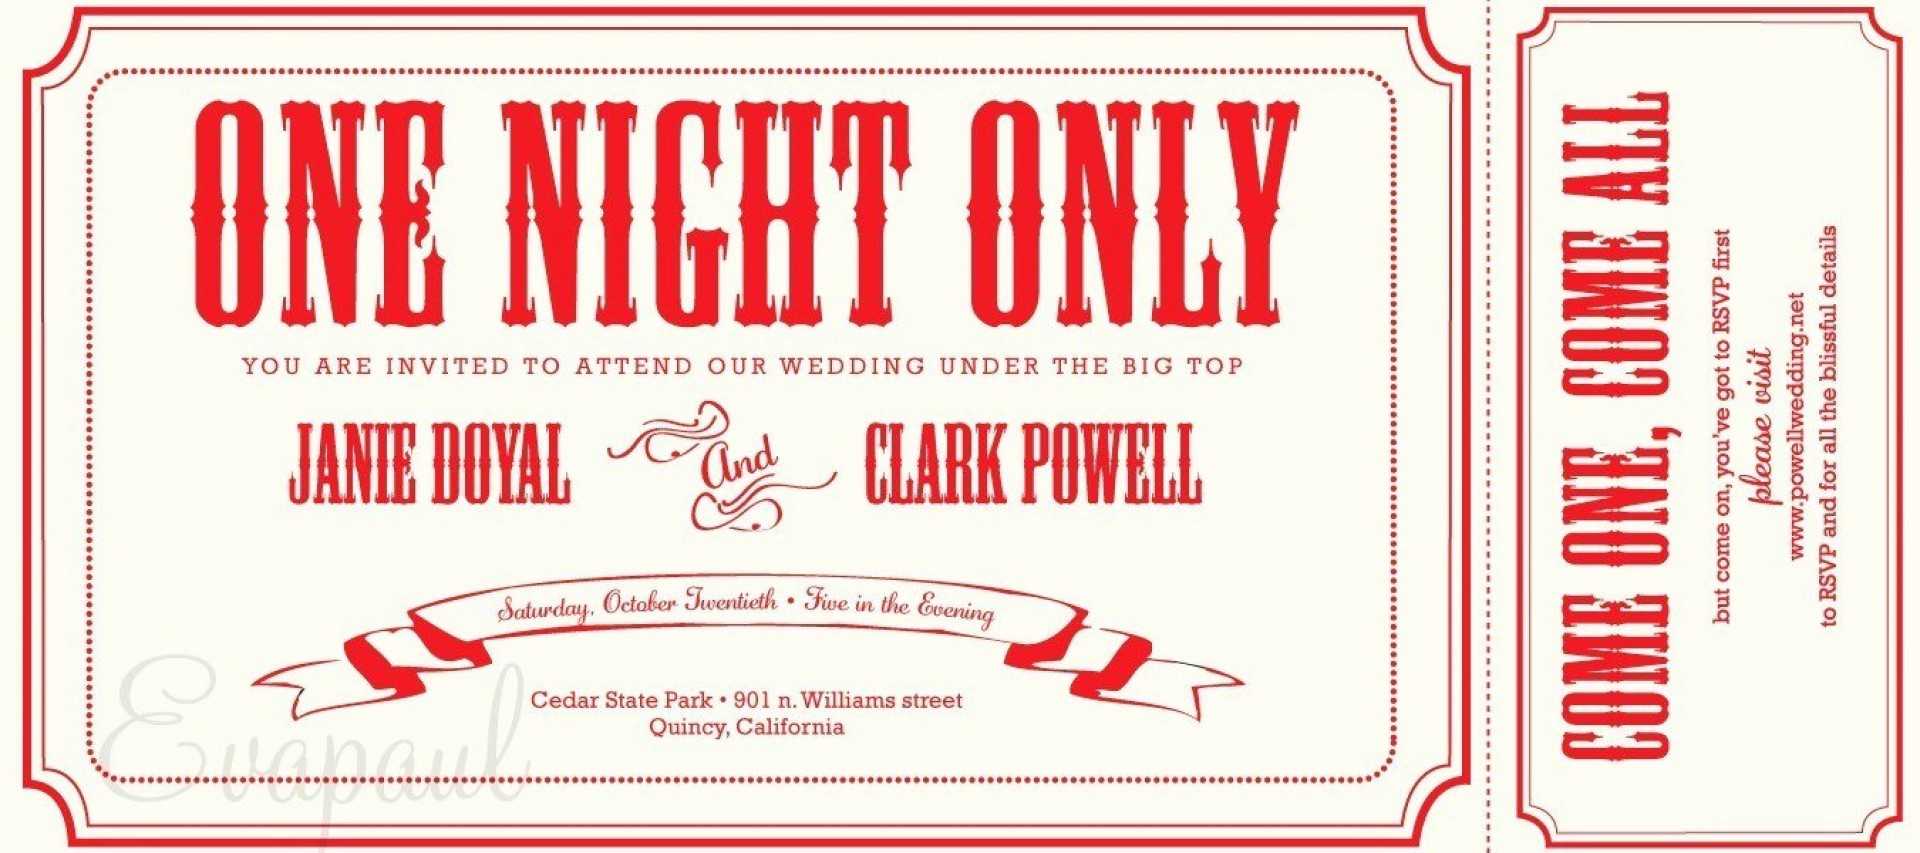 036 Template Ideas Ticket Invitation Free Printable Movie With Regard To Blank Parking Ticket Template